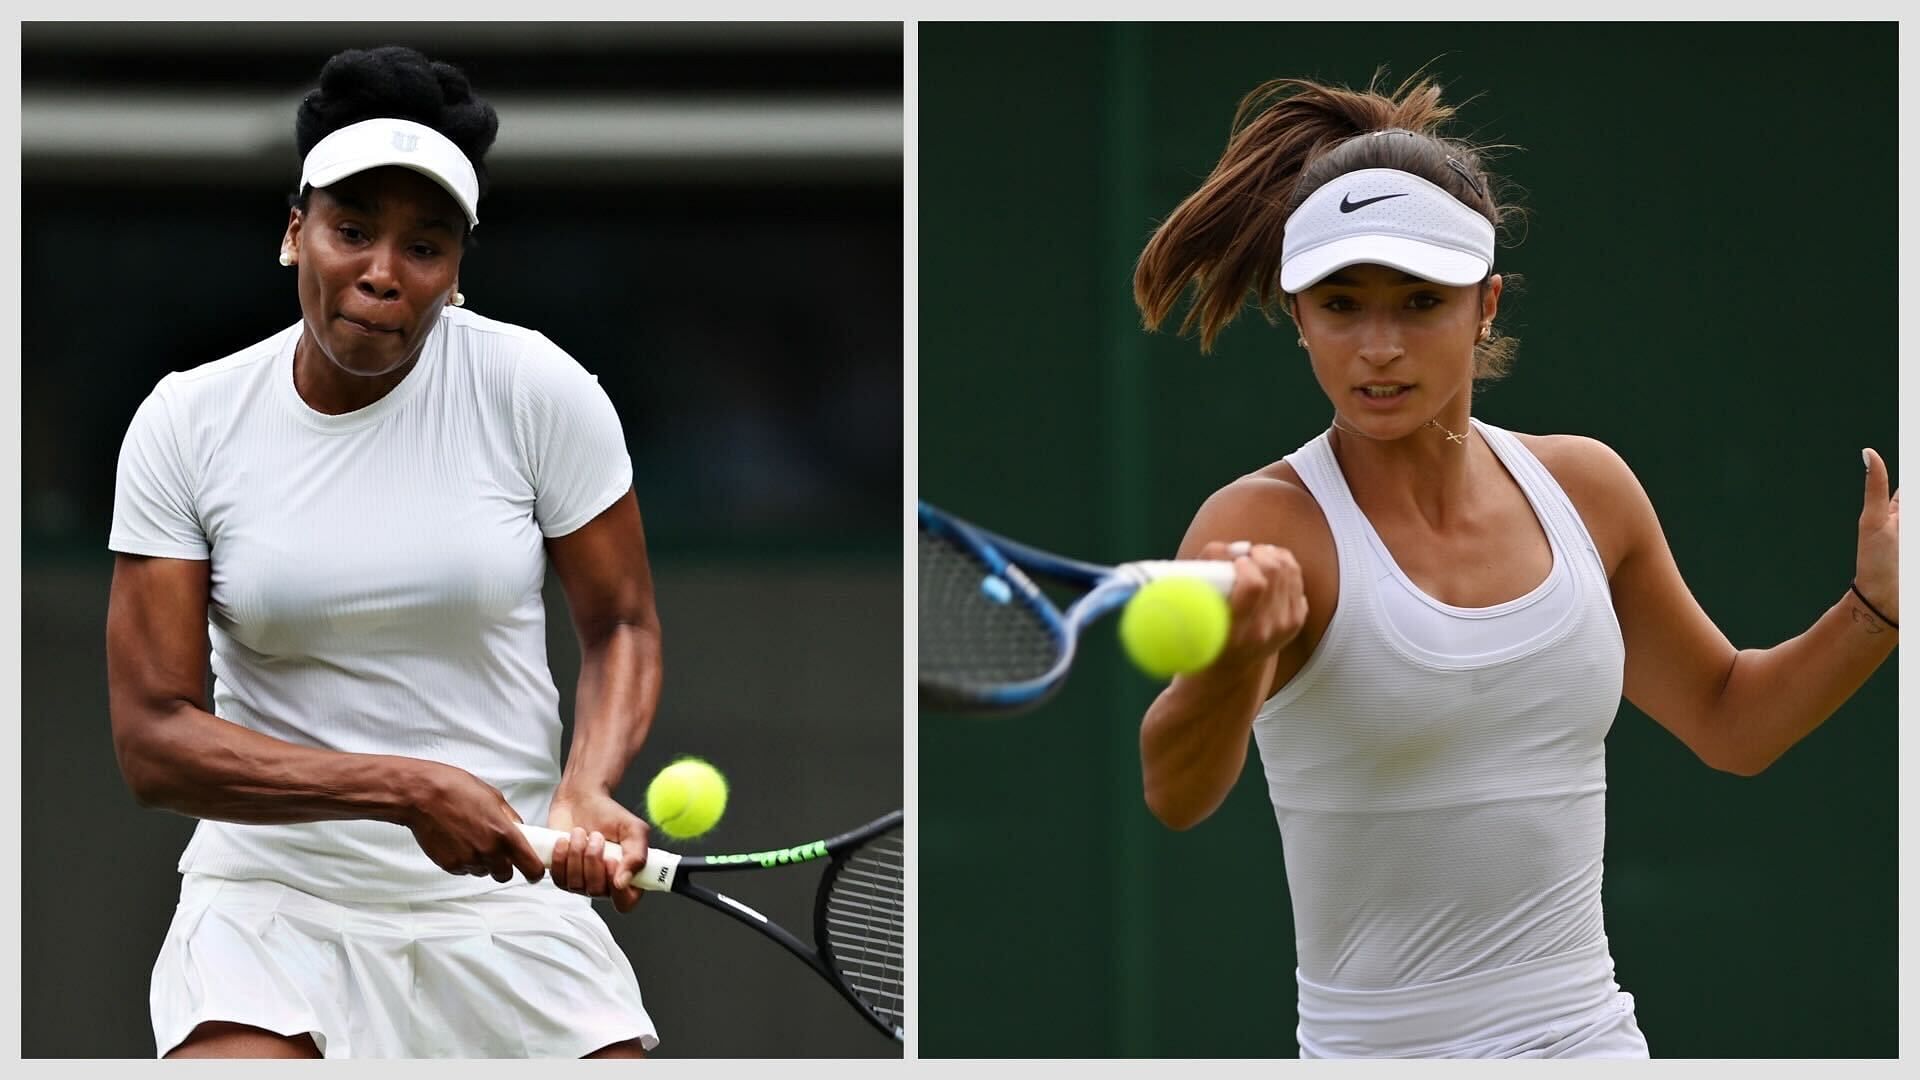 Venus Williams vs Celine Naef will be one of the first-round matches at the Libema Open